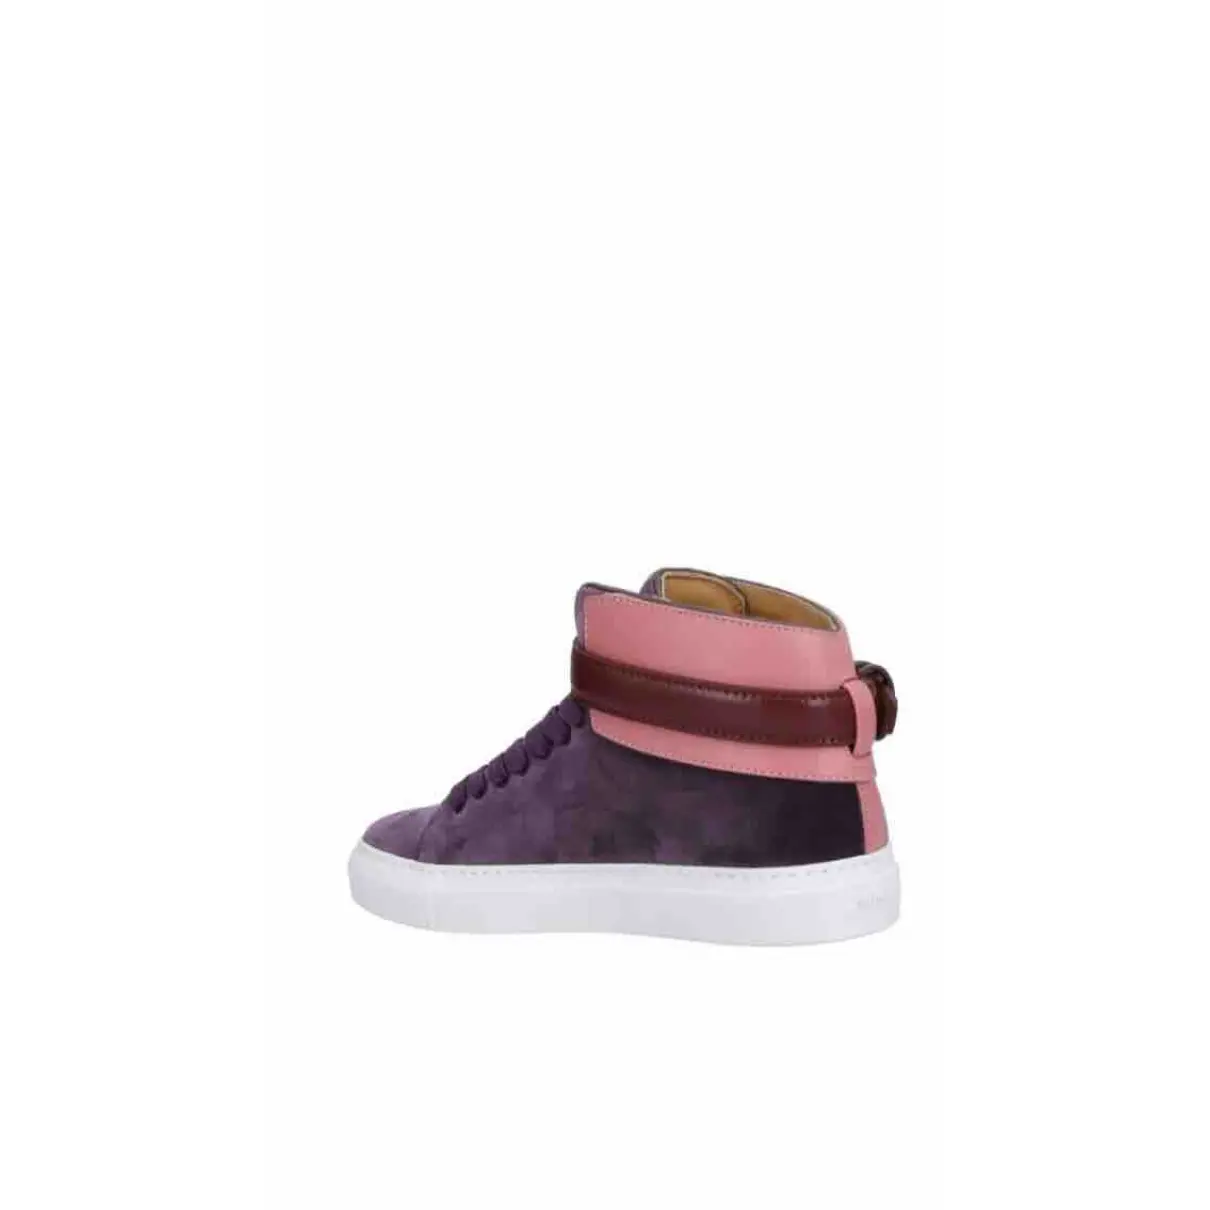 Buy Buscemi Leather trainers online